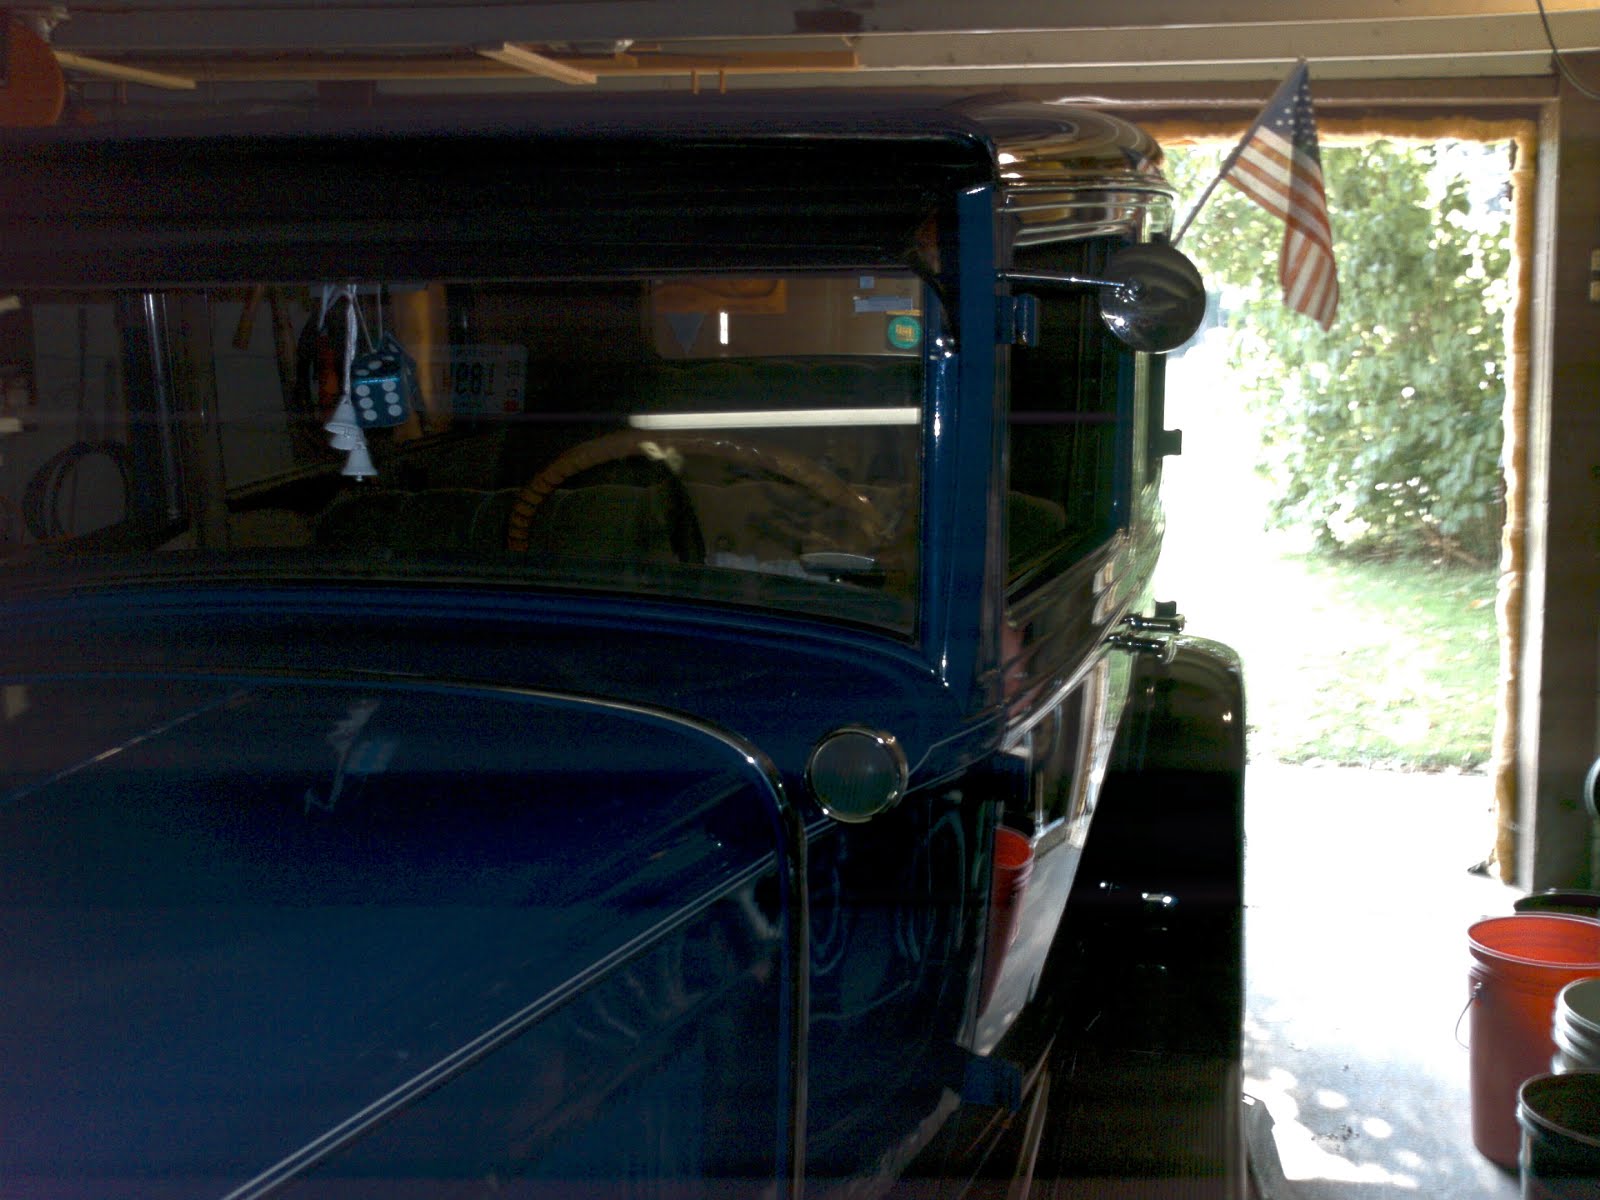 And speaking of old cars, here's more pictures of my 1930 Chevrolet sedan ~